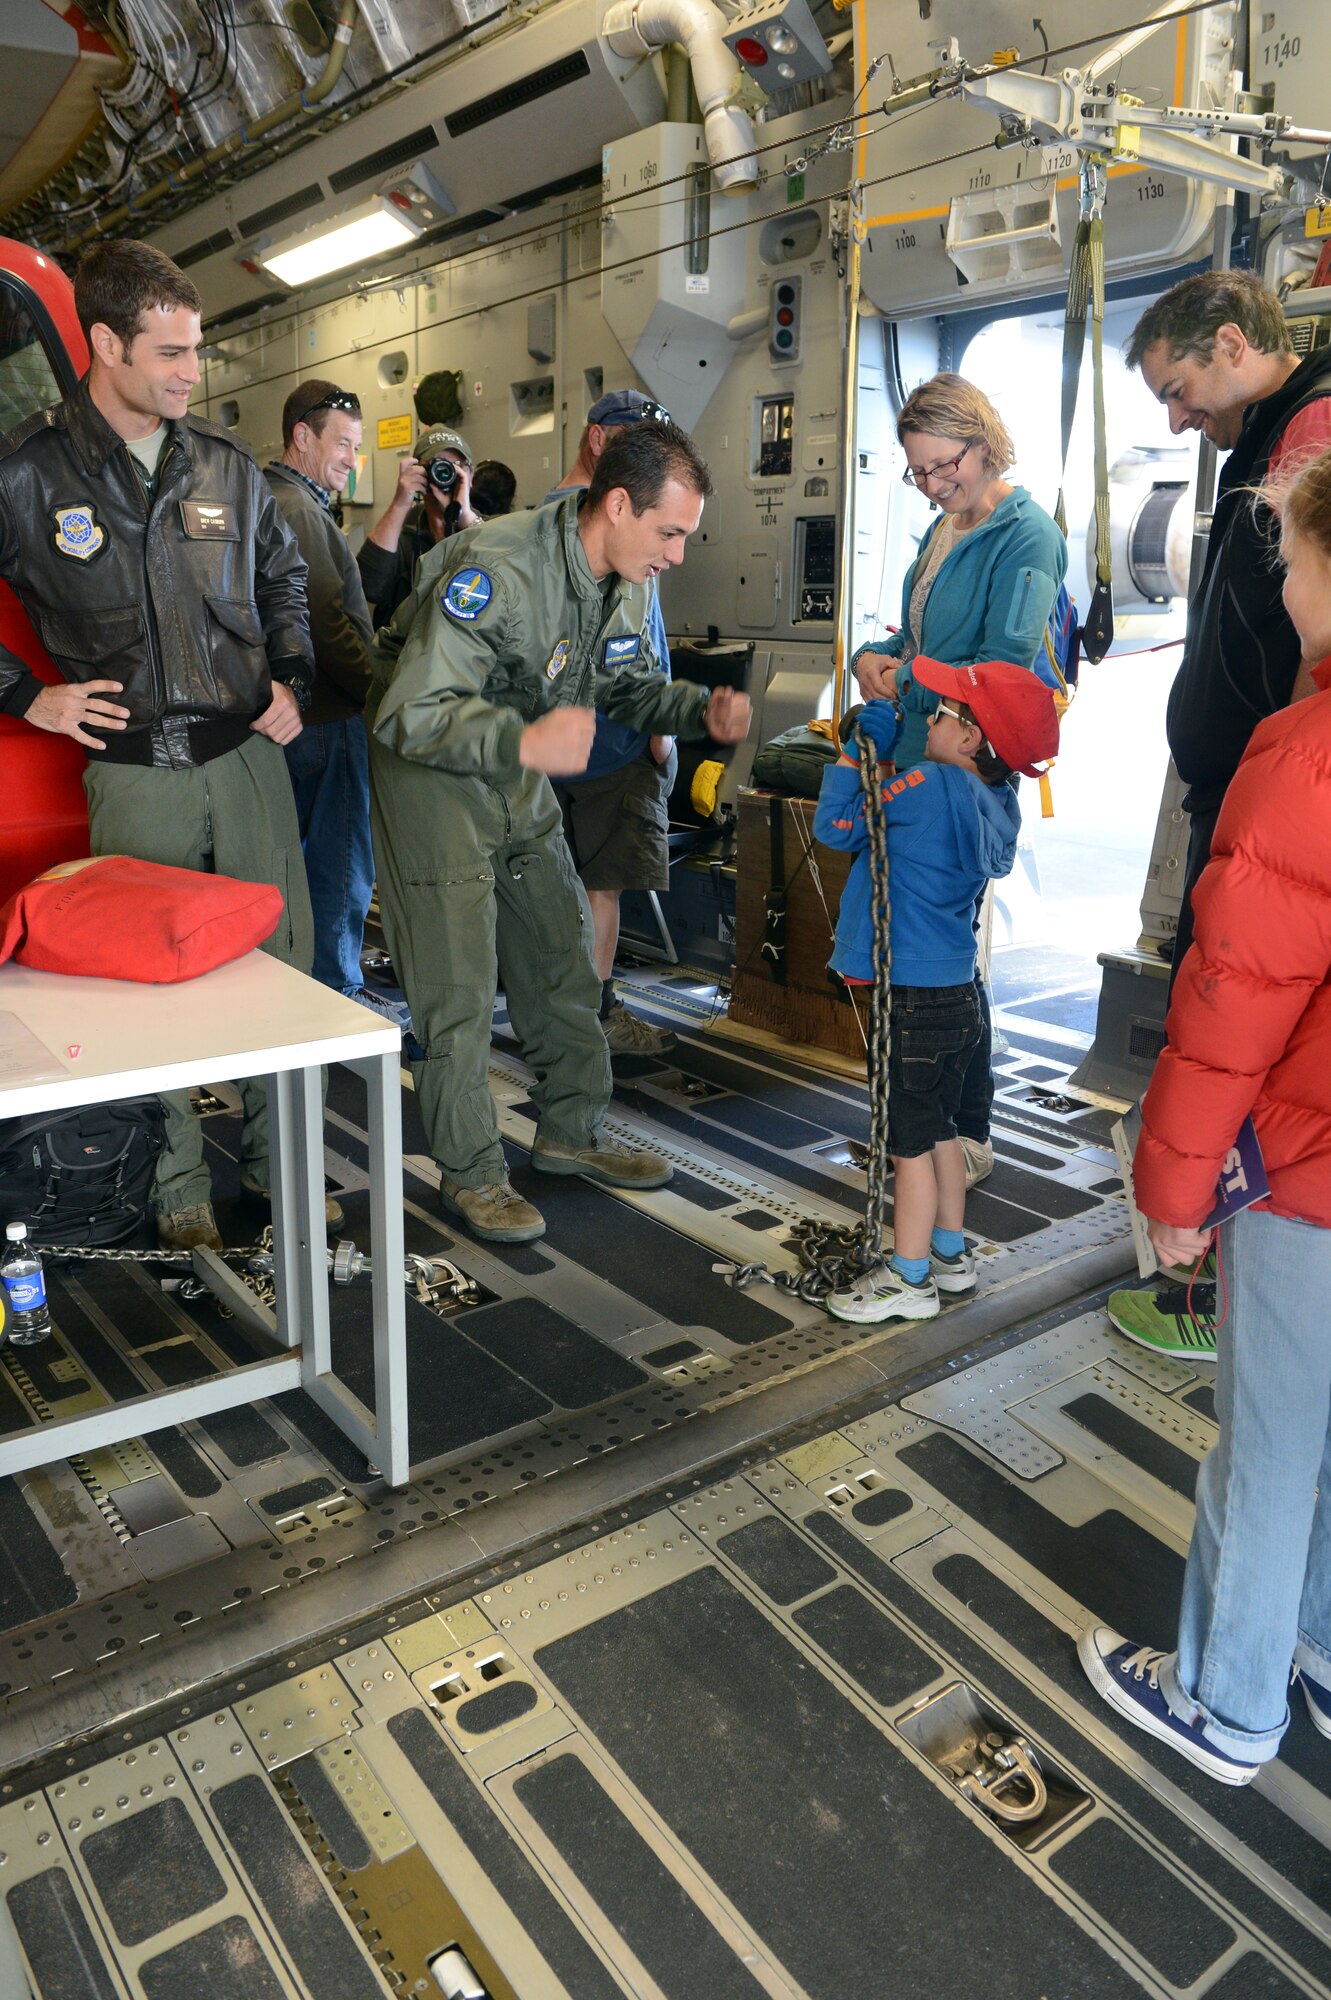 Staff Sgt. Kermit Maronge  helps a young New Zealand child try to lift up an MB2 tie-down chain on the C-17 Globemaster III, Oct. 5, 2014, as part of the U.S. Antarctic Program Day for IceFest 2014 at Christchurch, New Zealand. The chain weighs approximately 33 pounds and throughout the day the loadmasters let the children try and lift it. Maronge is a loadmaster with the 304th Expeditionary Airlift Squadron and 7th Airlift Squadron. (U.S. Air Force photo/Master Sgt. Todd Wivell)